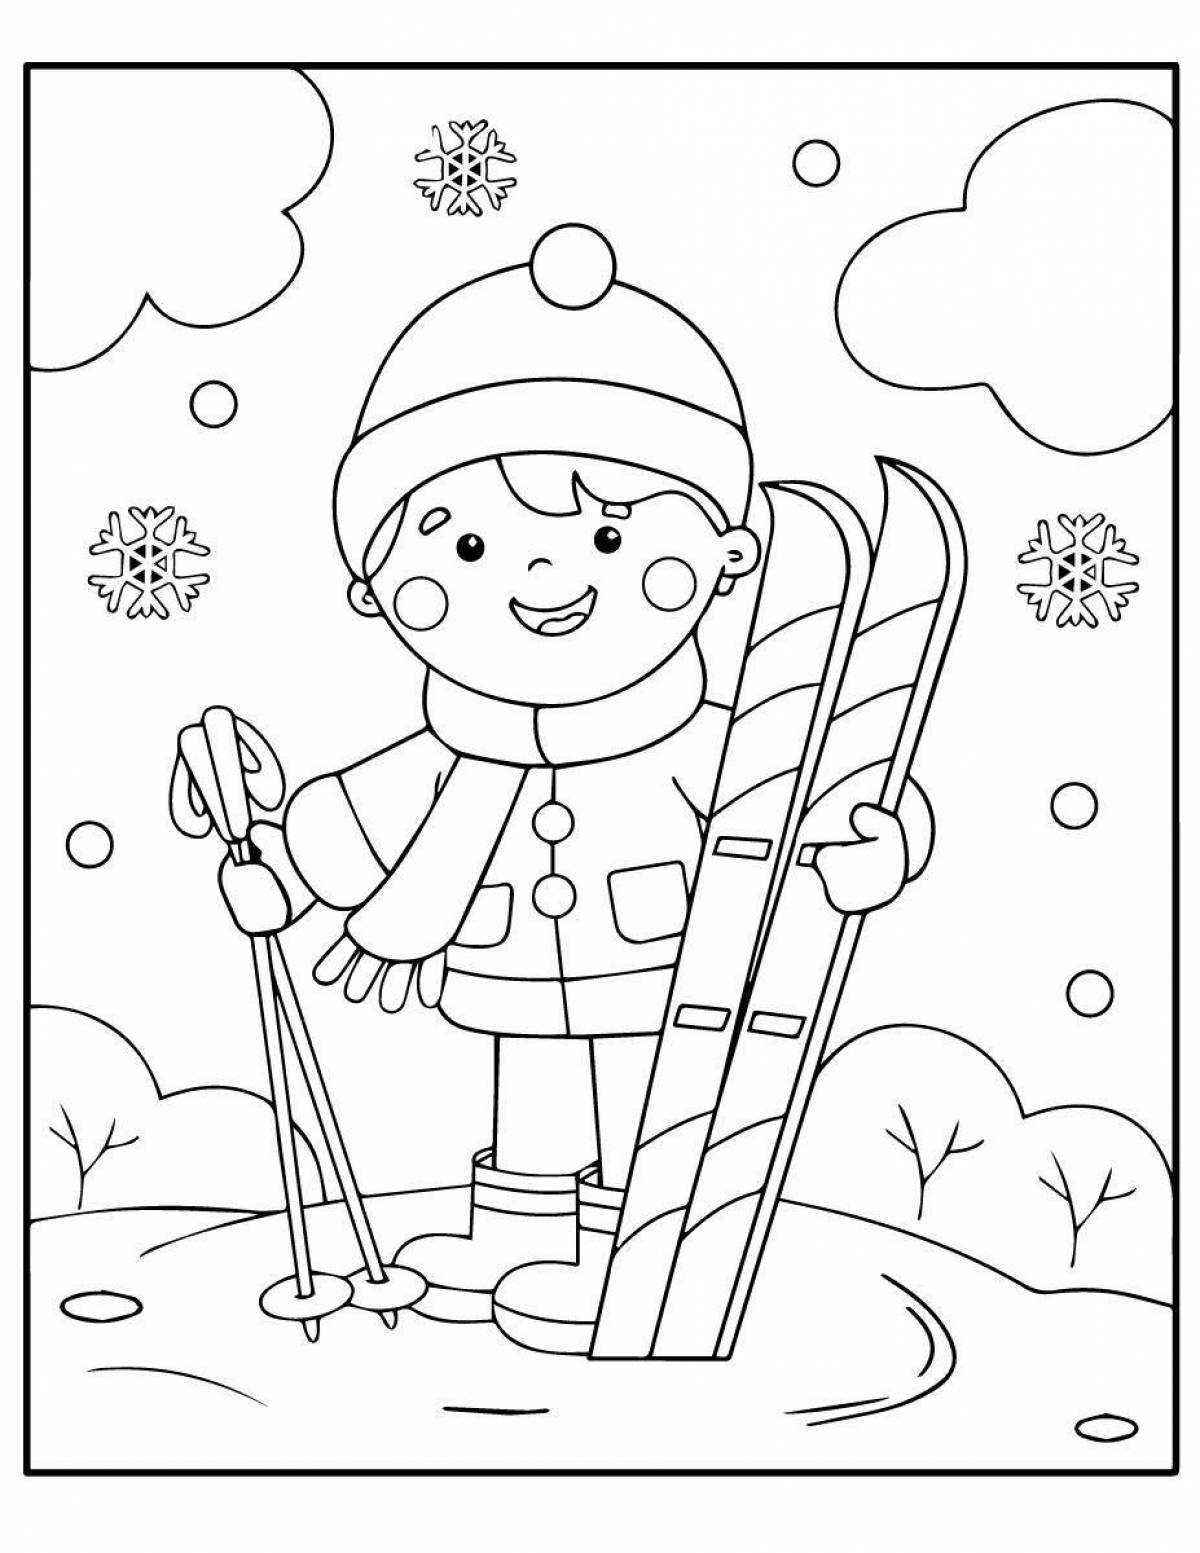 Coloring book of a cheerful skier for children